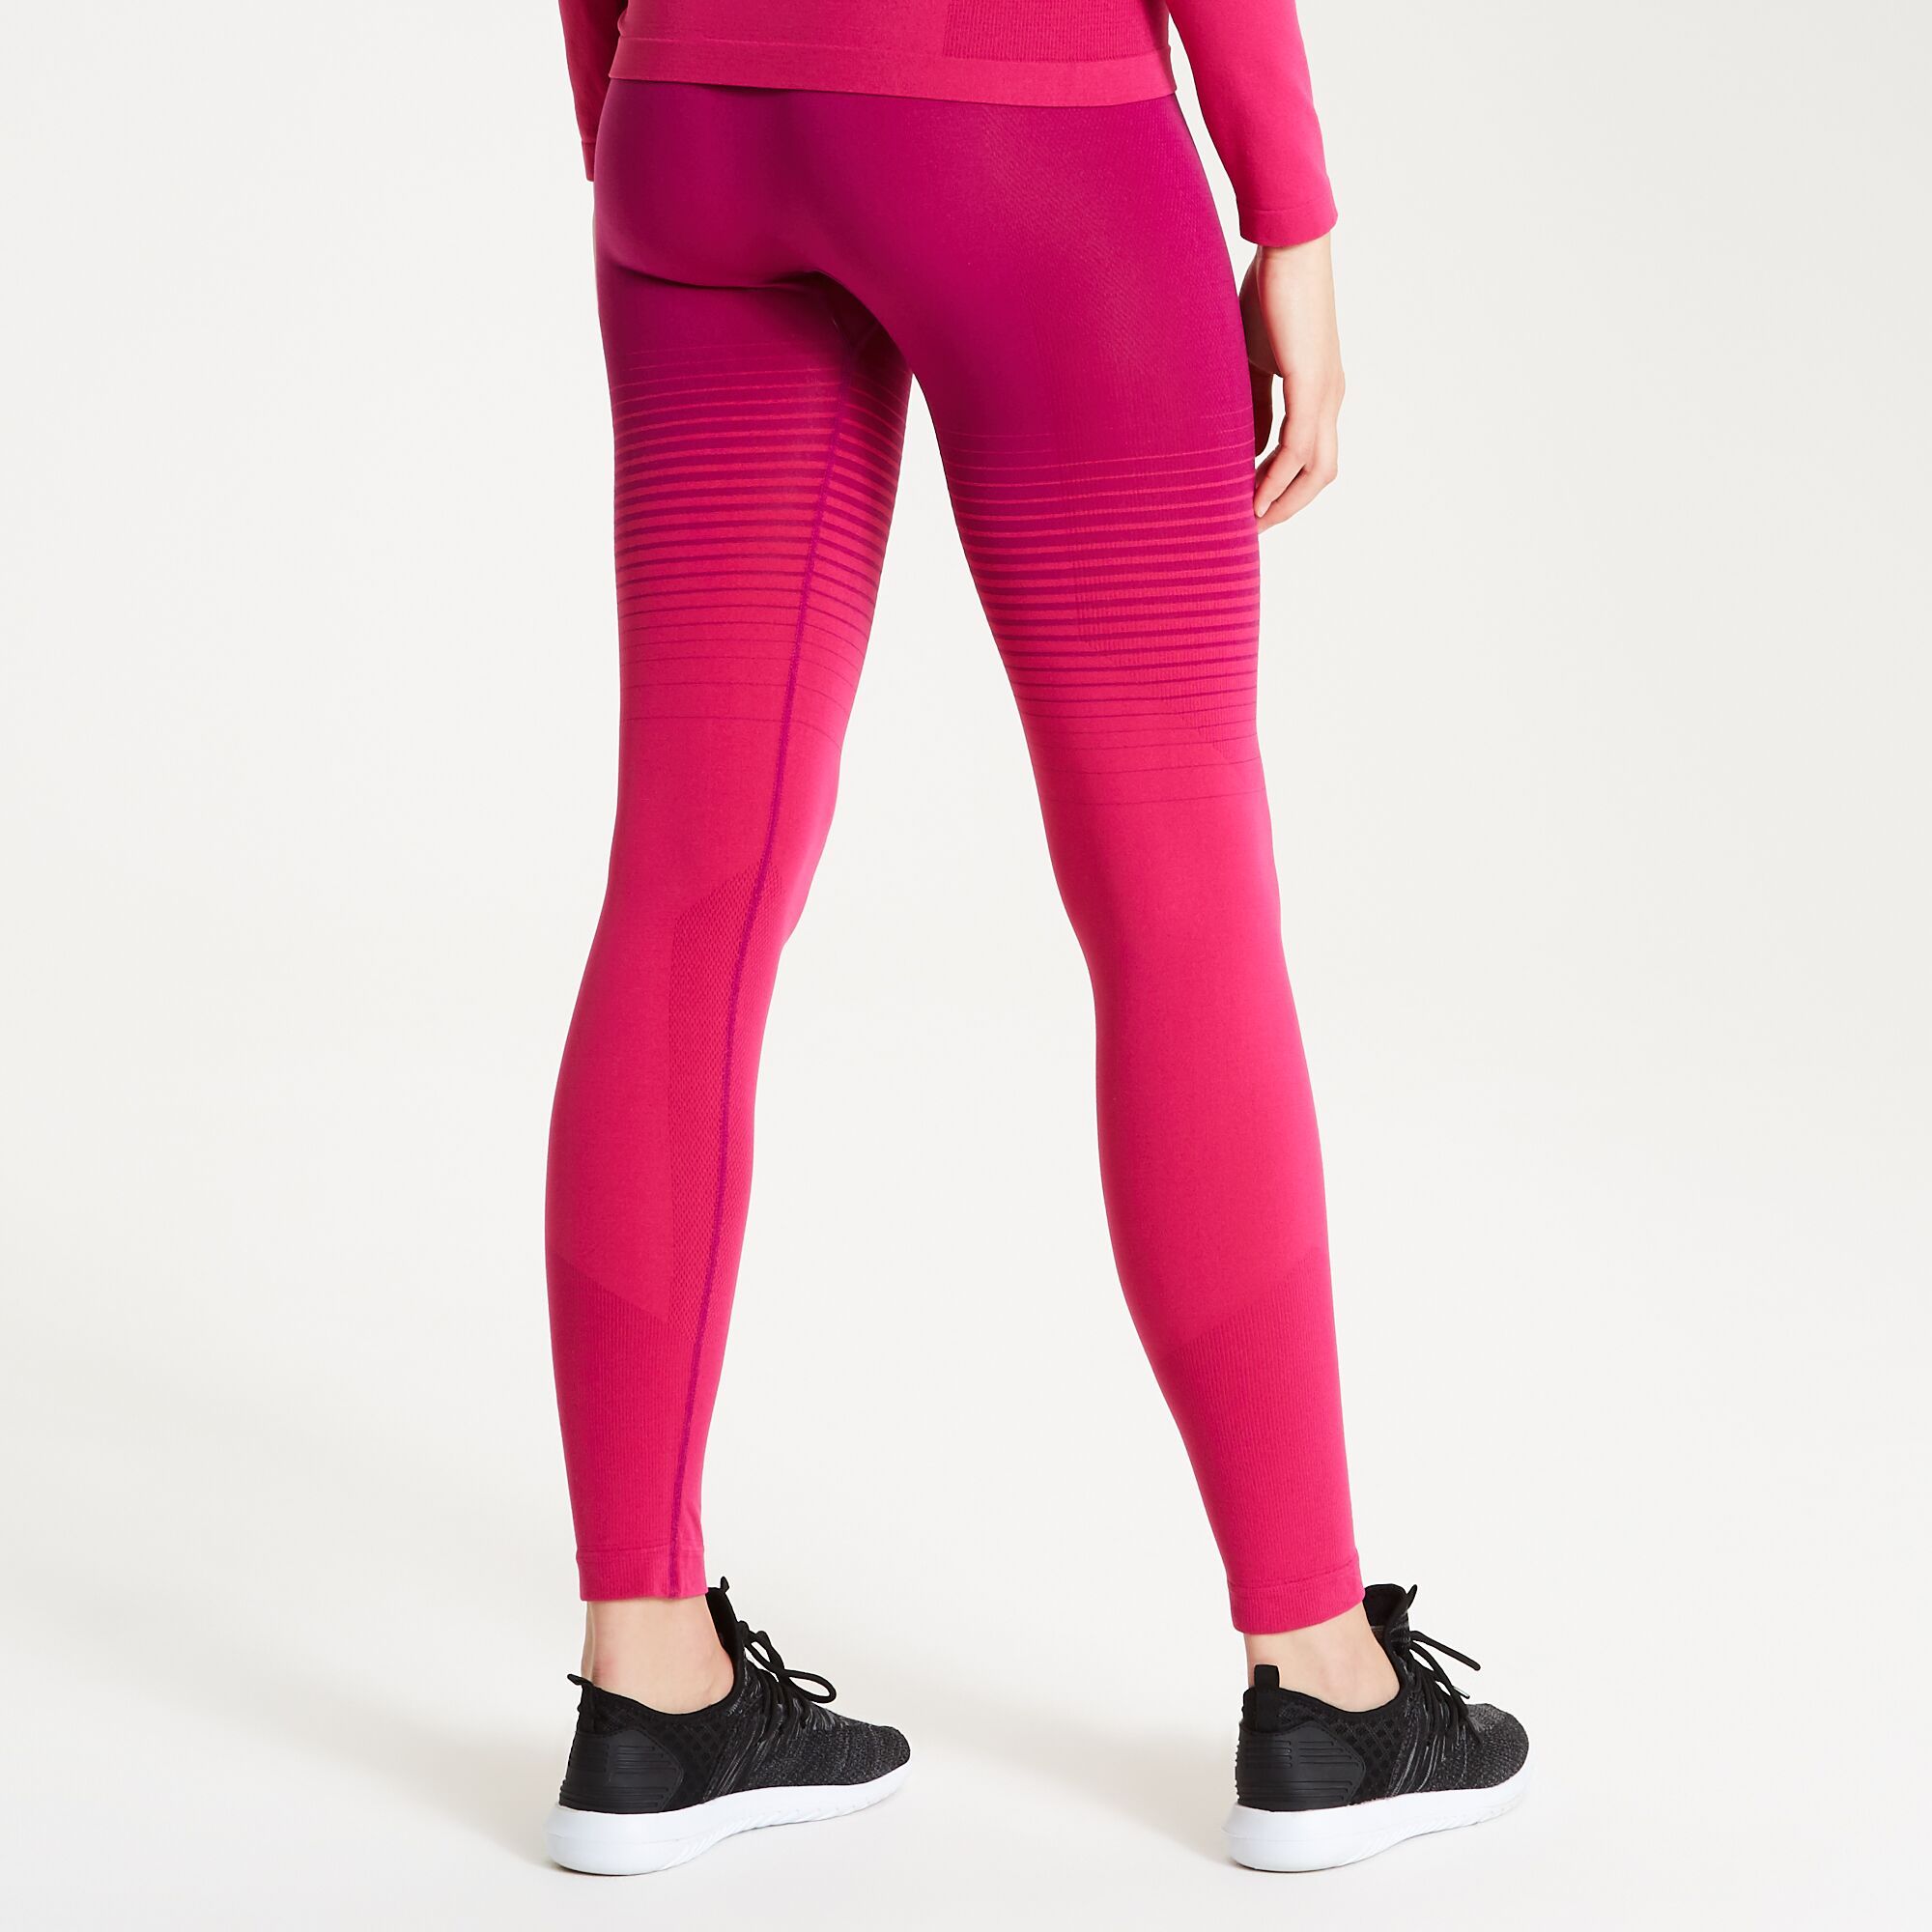 Elastane (8%), Polyester (42%), Polyamide (50%). Performance base layer collection. SeamSmart Technology. Q-Wic Seamless knitted fabric. Ergonomic body map fit. Fast wicking and quick drying properties.  odour control treatment. Dare 2B Womens Trousers Sizing (waist approx): 6 (22in/56cm), 8 (24in/61cm), 10 (26in/66cm), 12 (28in/71cm), 14 (30in/76cm), 16 (32in/81cm), 18 (34in/86cm), 20 (36in/92cm).